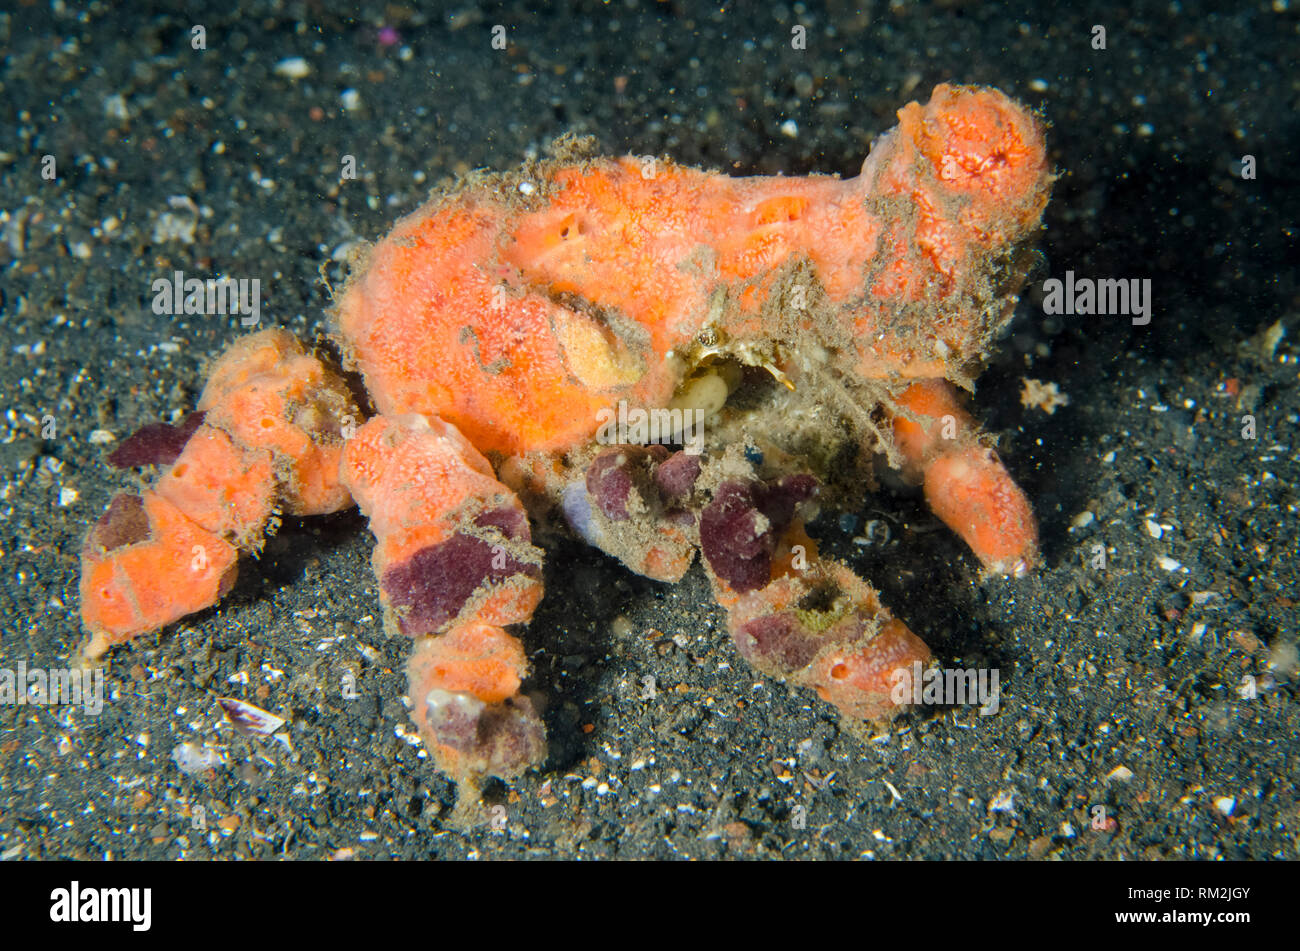 Blunt Decorator Crab, Camposcia retusa, covered in sponges for camouflage on black sand, on night dive, TK1 dive site, Lembeh Straits, Sulawesi, Indon Stock Photo